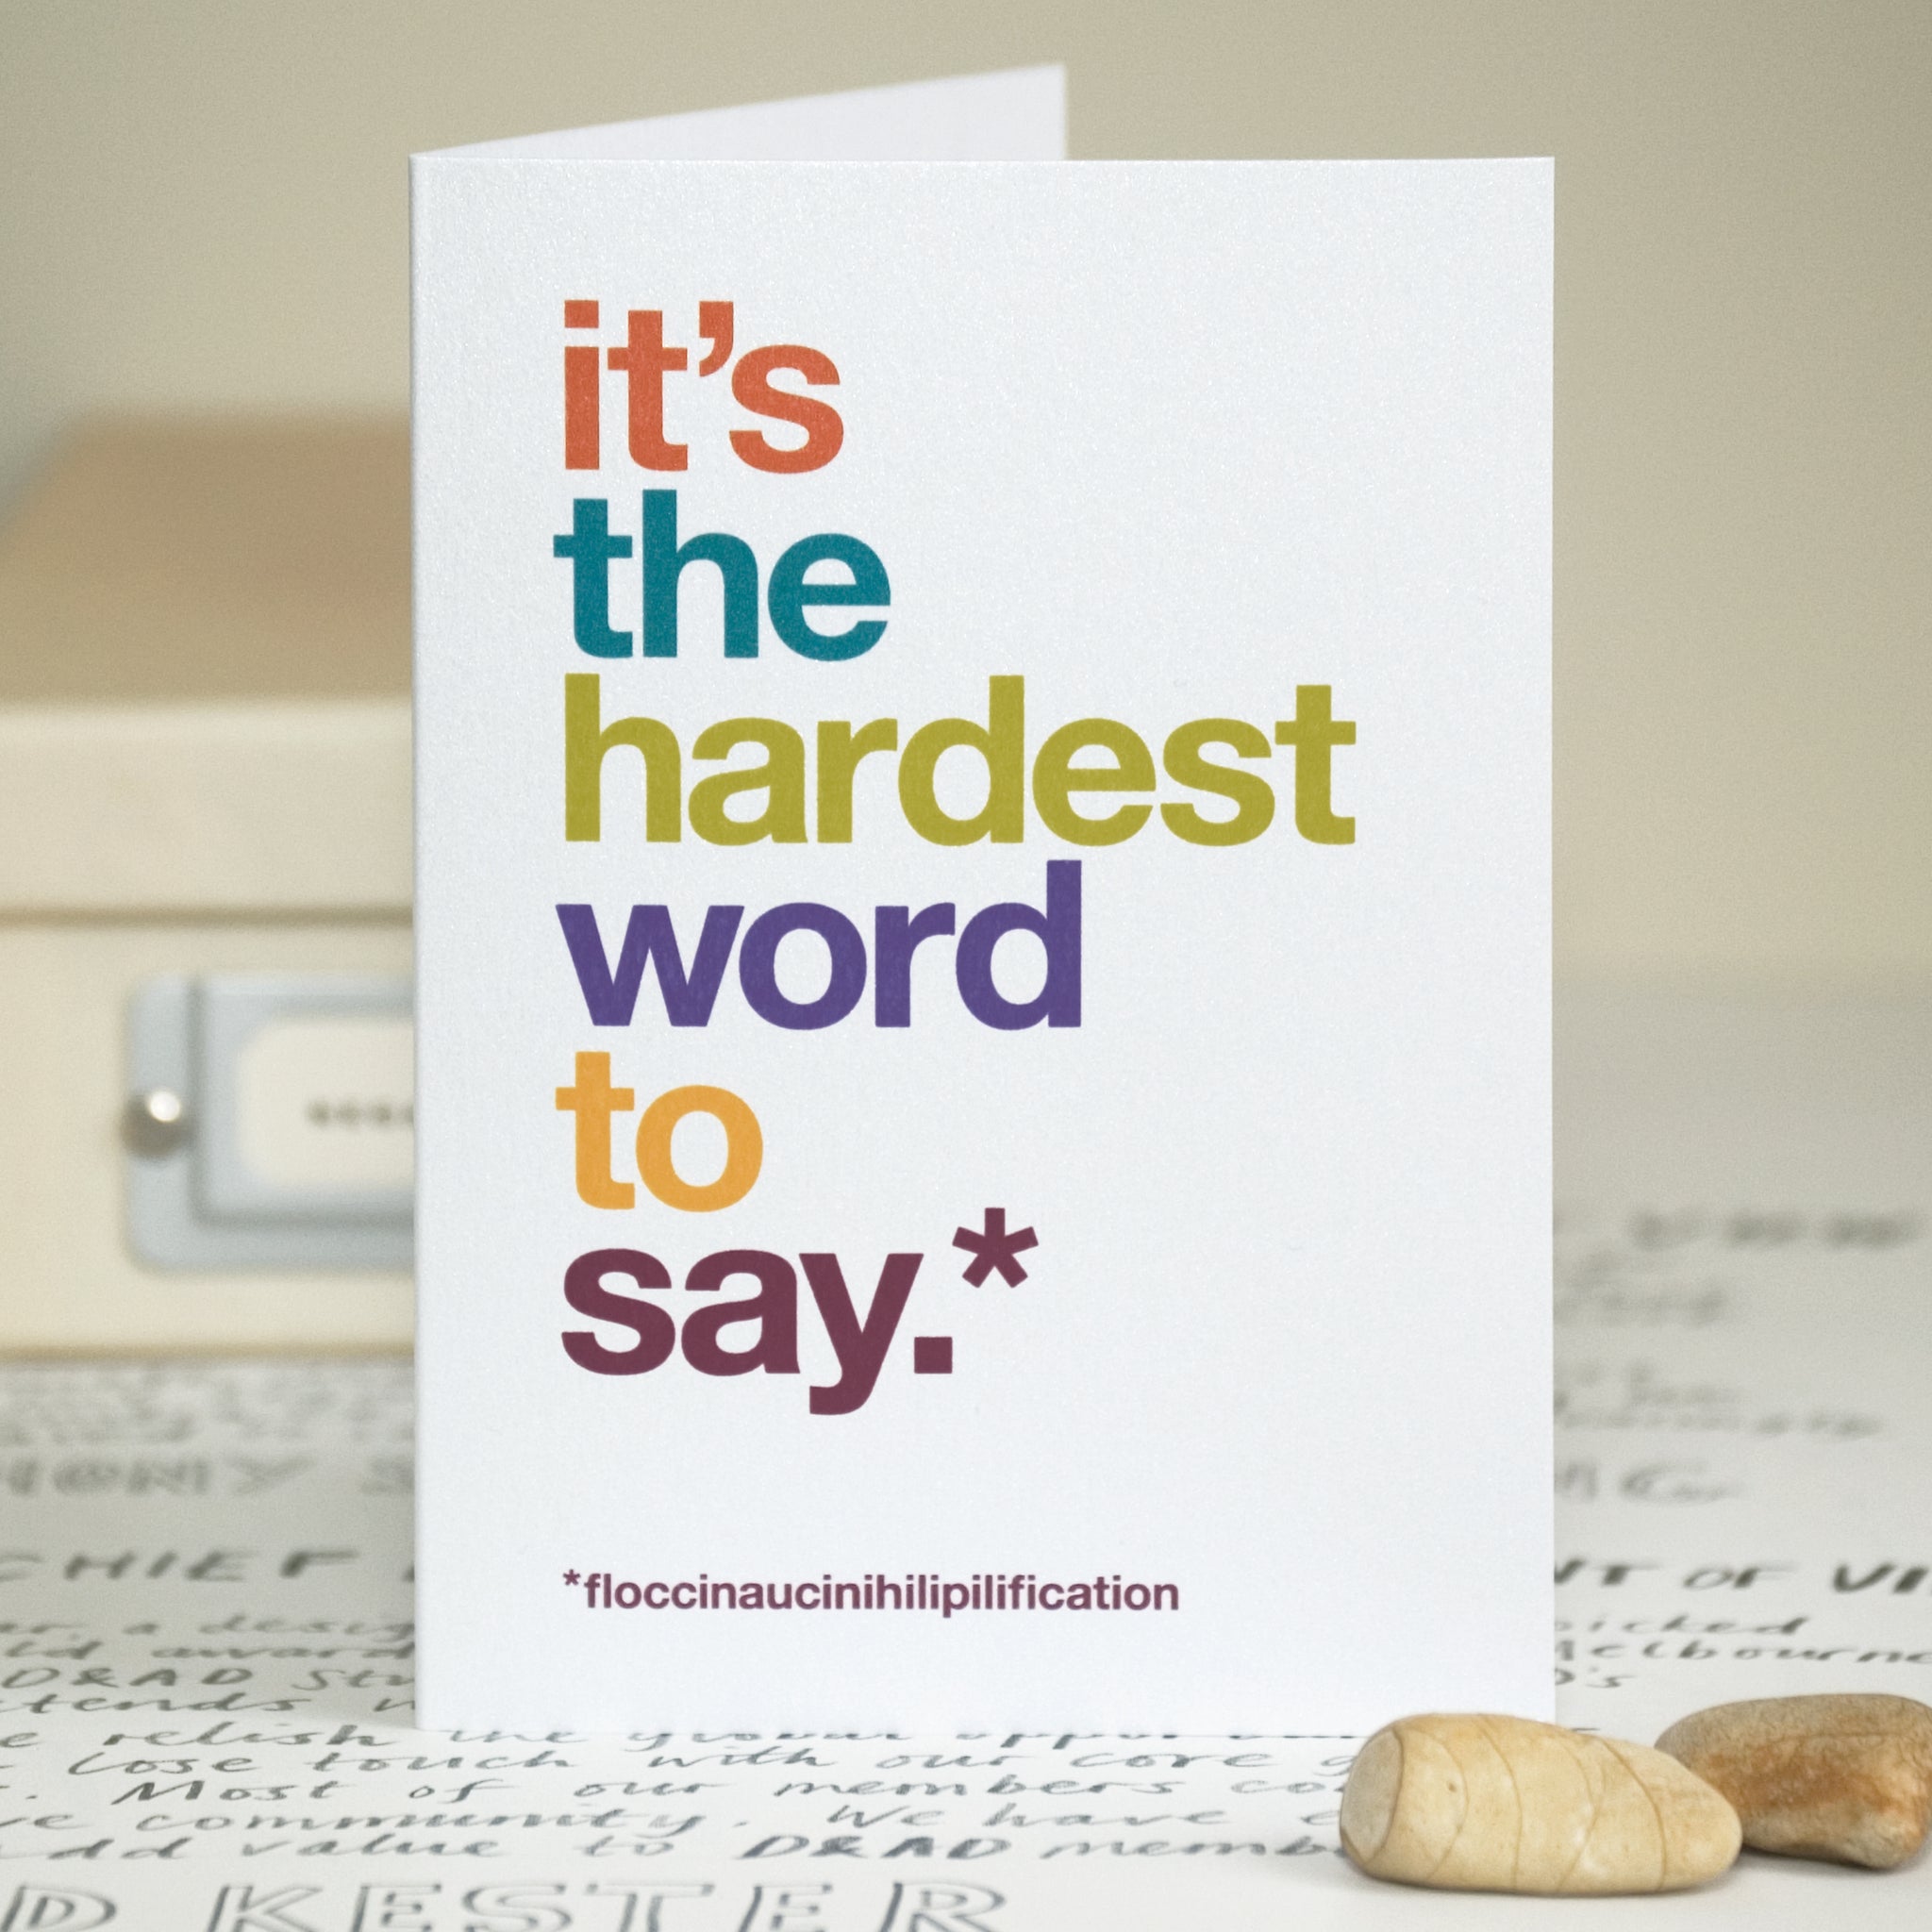 A funny sorry card with the text 'it's the hardest word to say'. At the bottom of the card is the text 'floccinaucinihilipilification'.